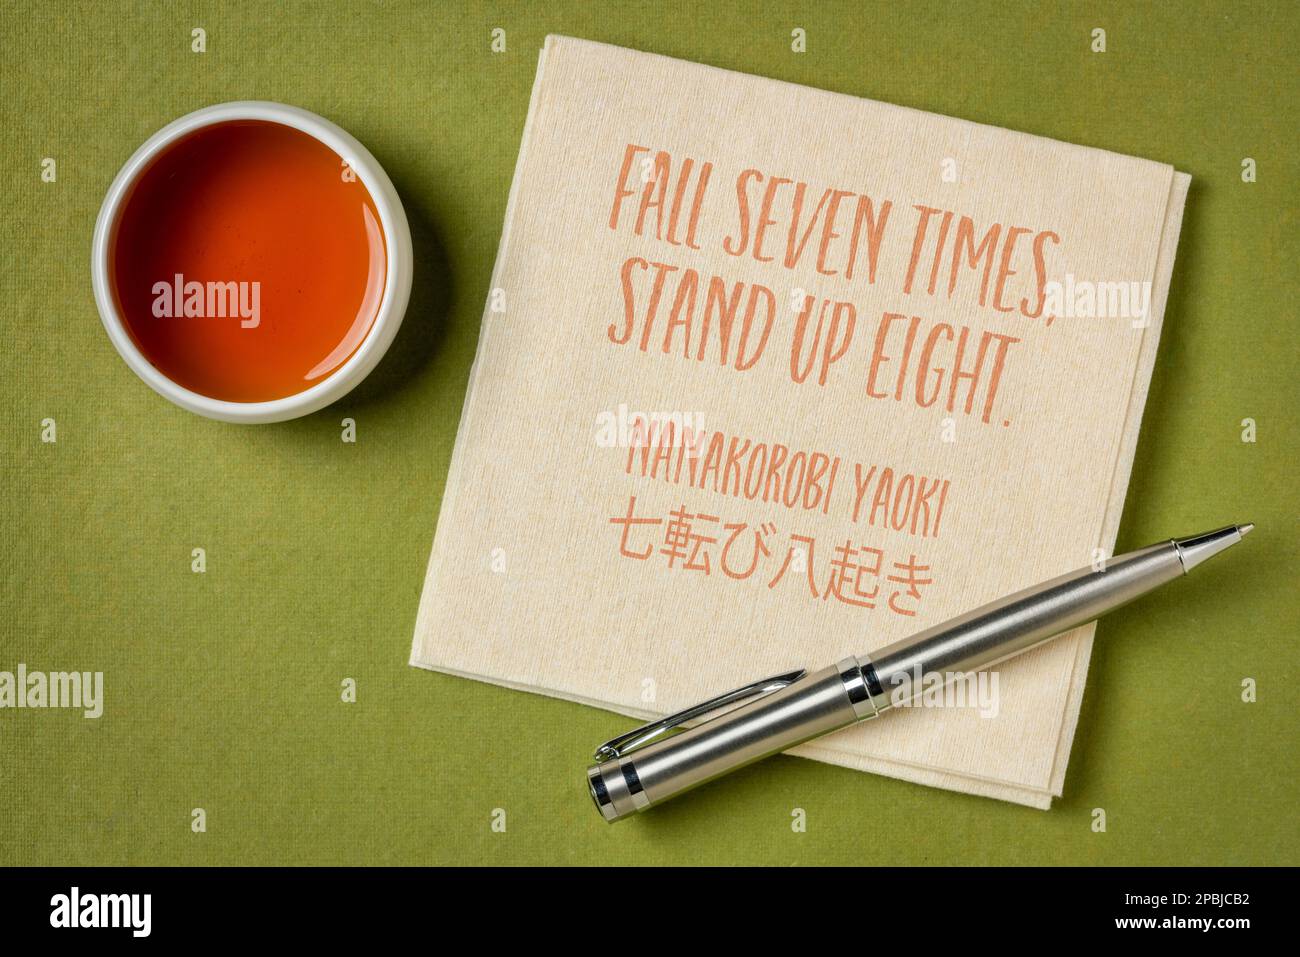 Fall seven times, stand up eight. Japanese proverb on napkin with a cup of tea. Determination and persistence concept. Stock Photo